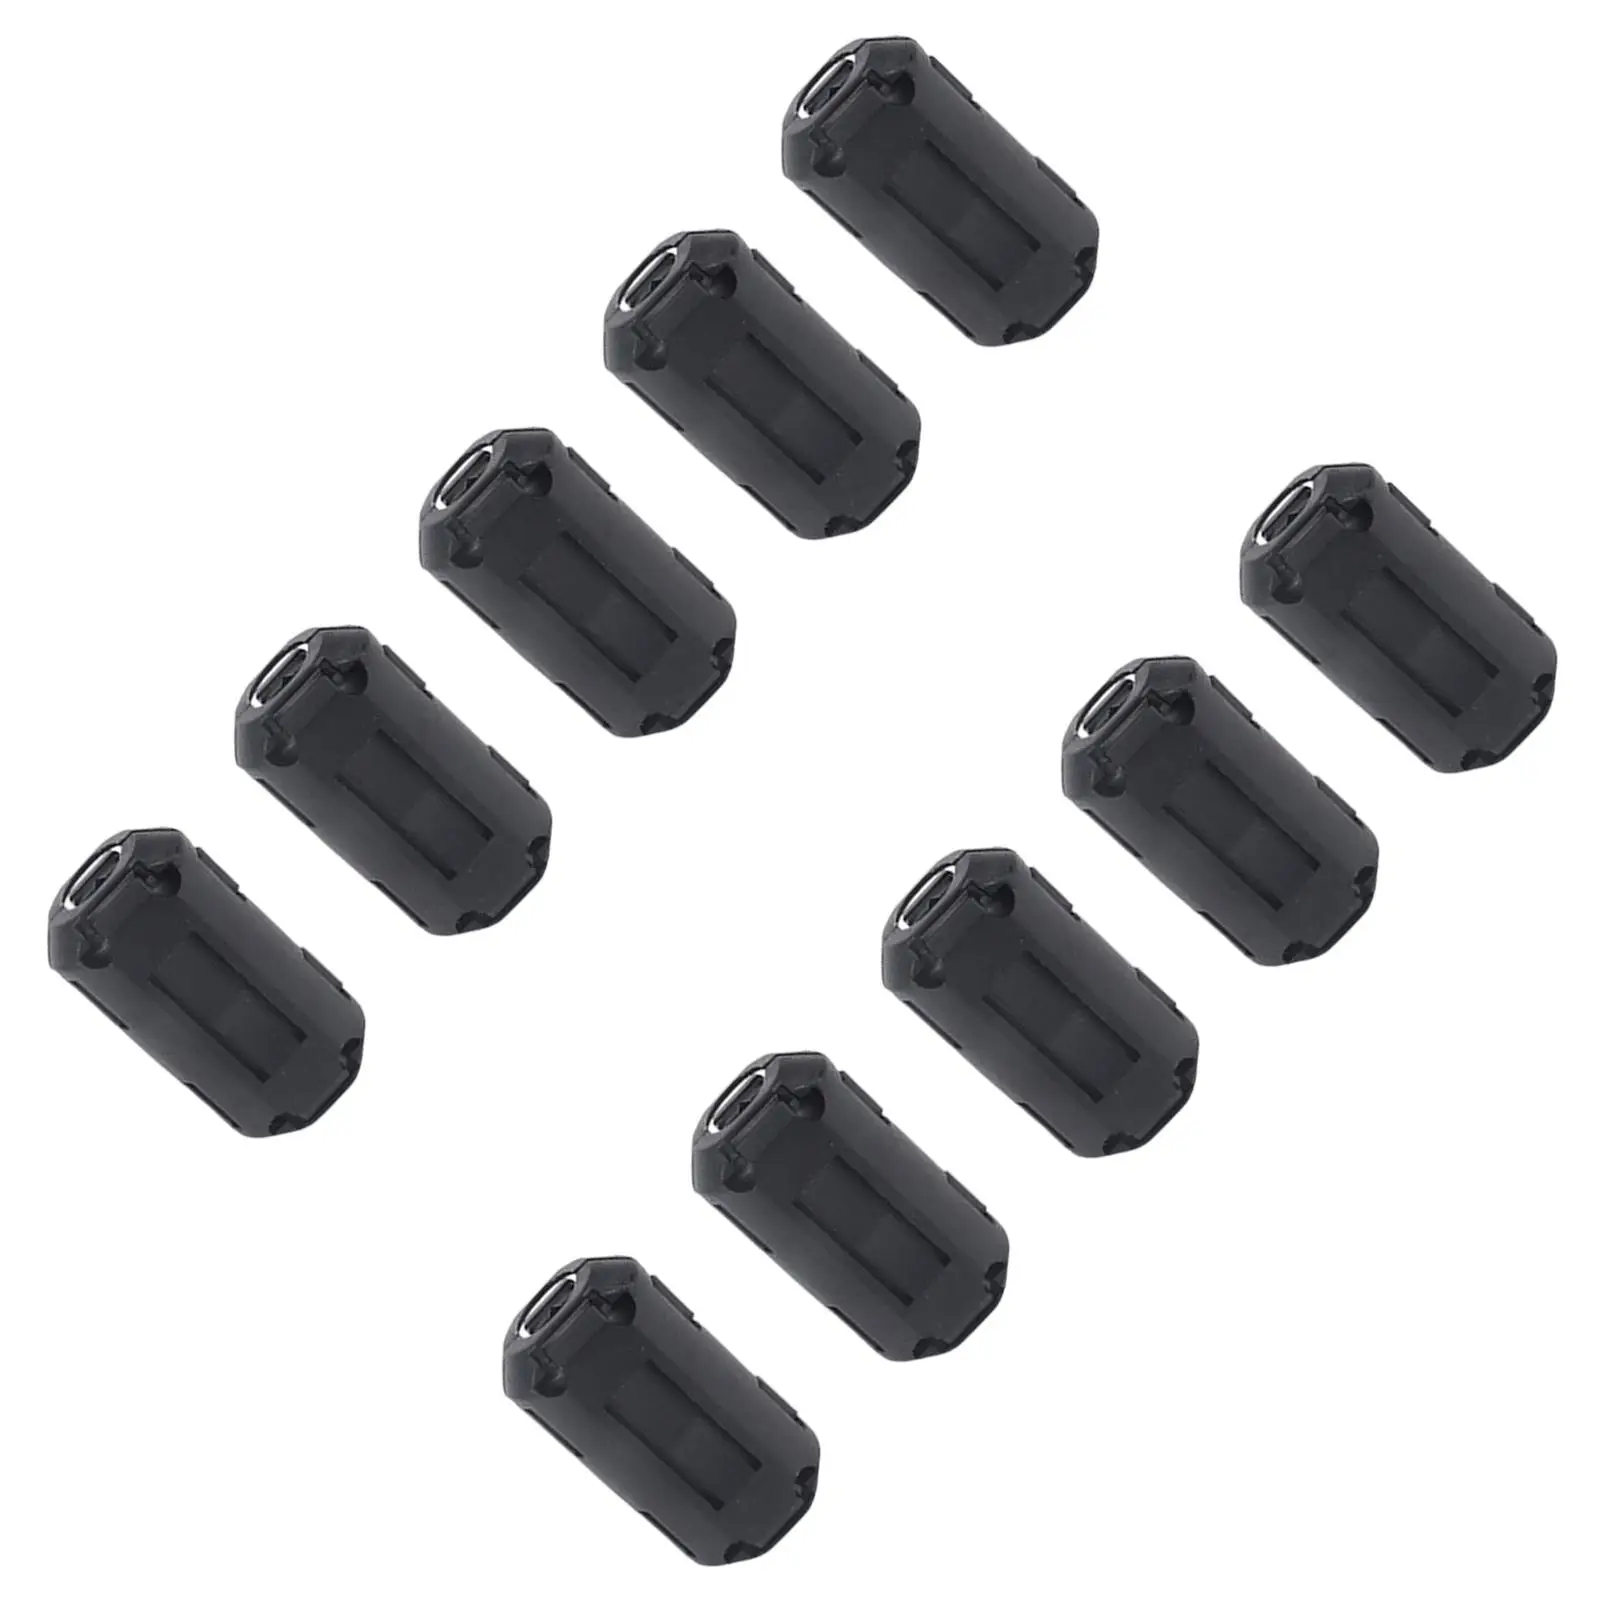 10x 13mm Ferrite Core Rings Beads Rfi Noise Suppressor Filters for Antenna 9-13mm Cable Audio Cable Clips Noise Filter Clips